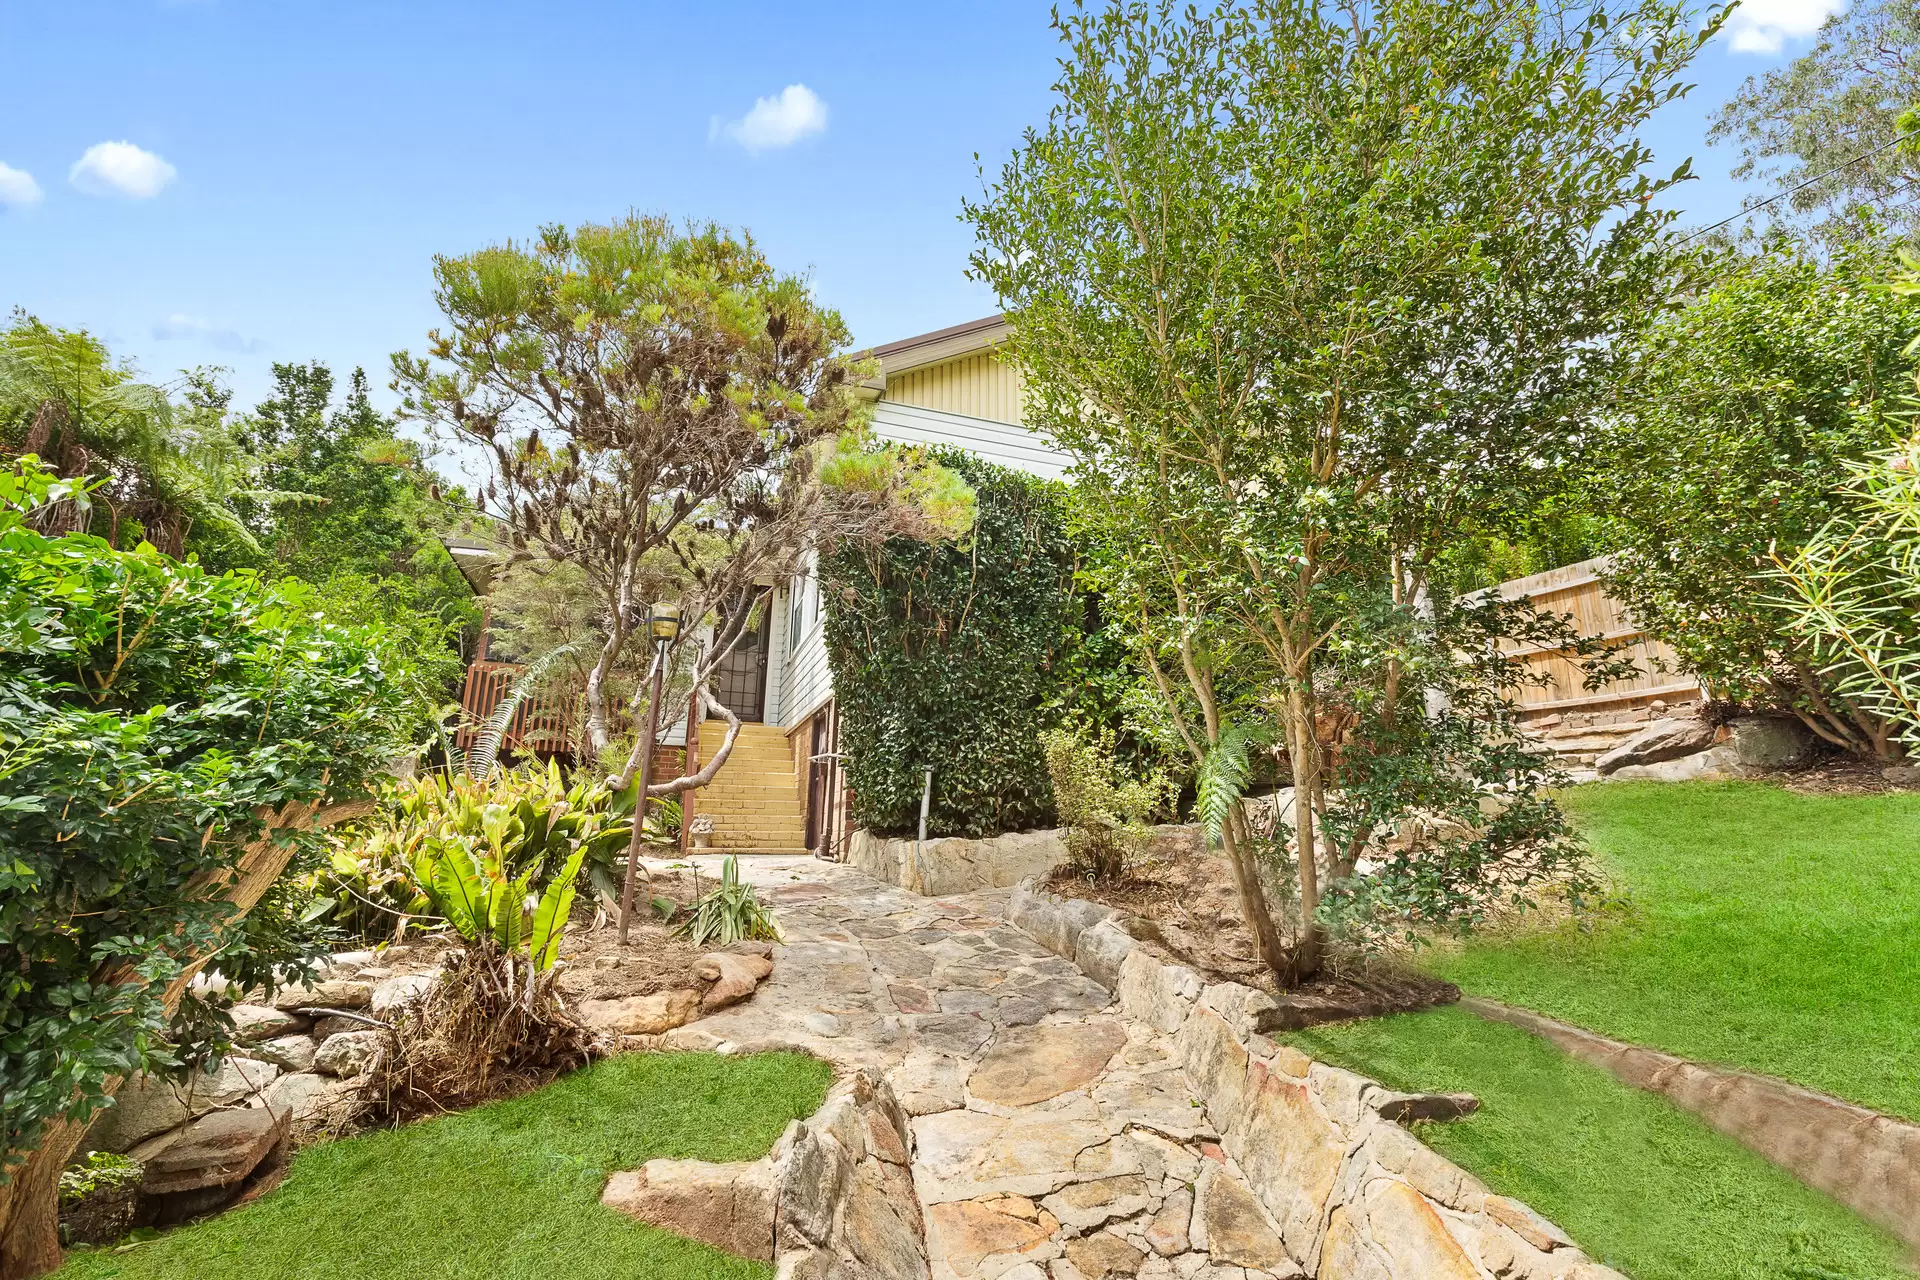 89 Monash Road, Gladesville Sold by Cassidy Real Estate - image 1